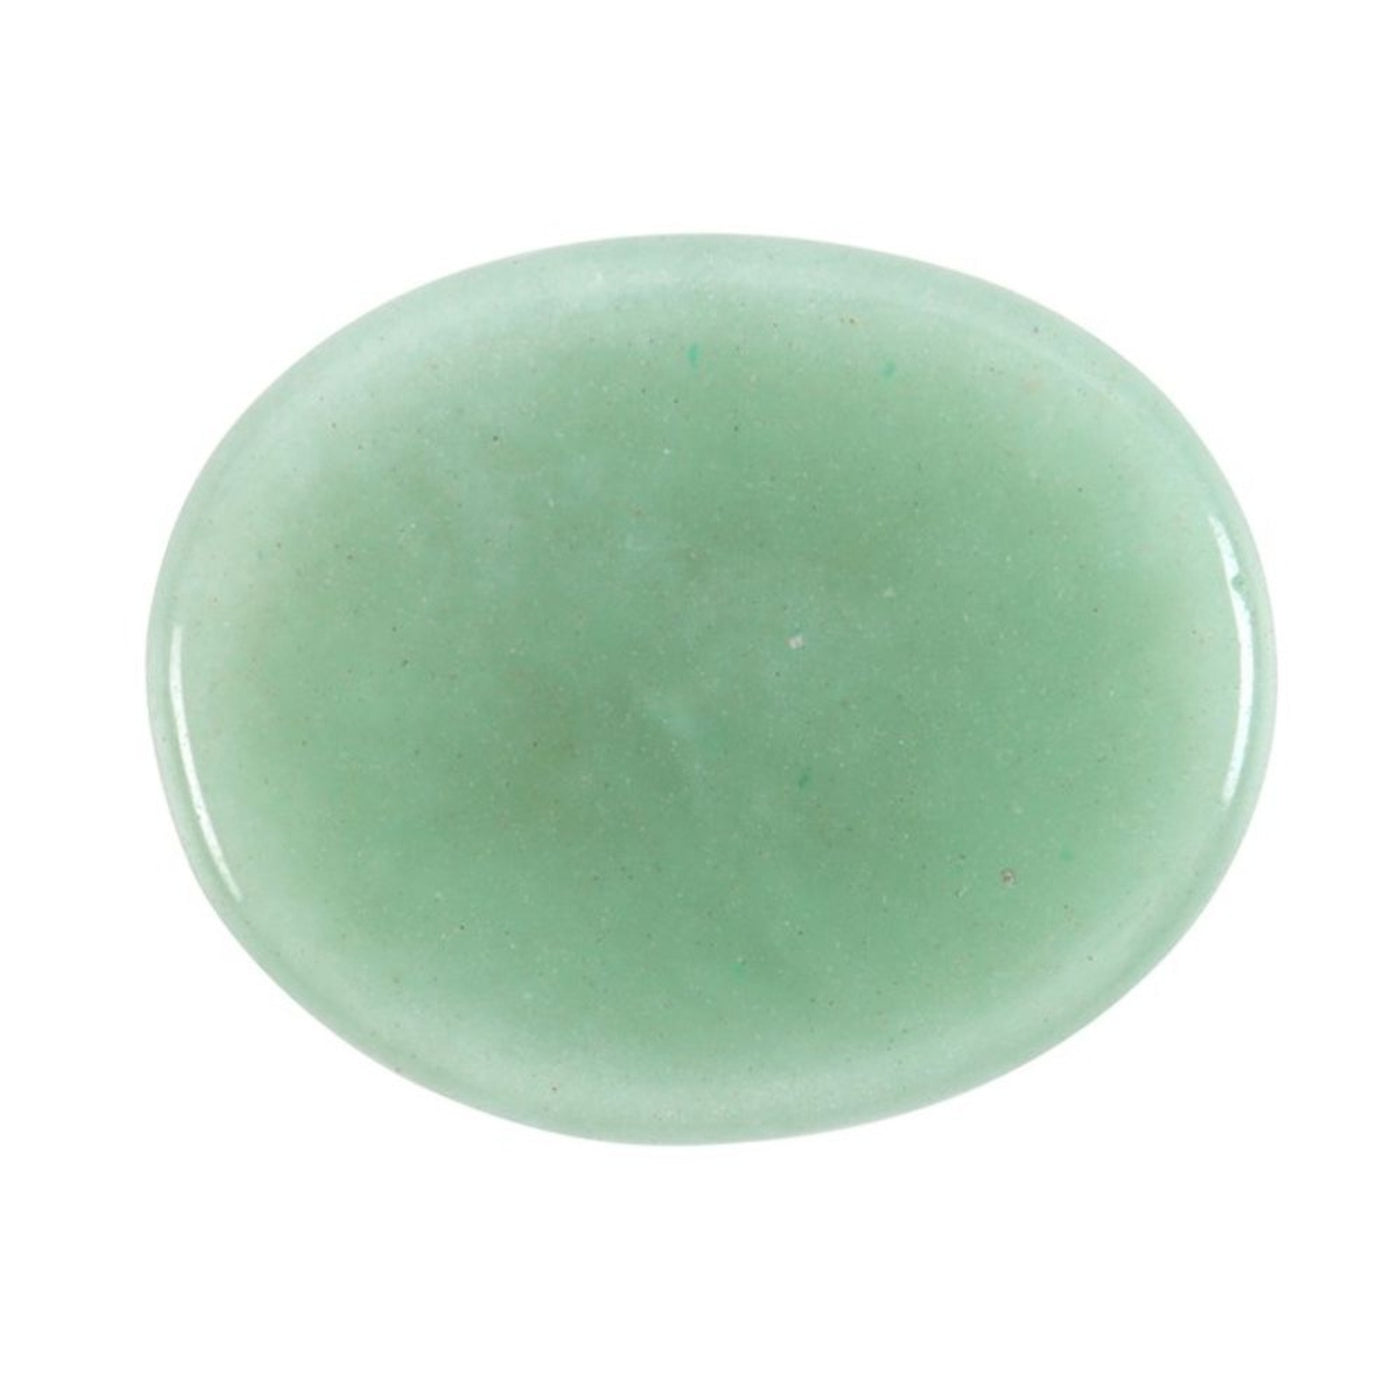 Good Luck Aventurine Crystal Palm Stone In Drawstring Pouch.